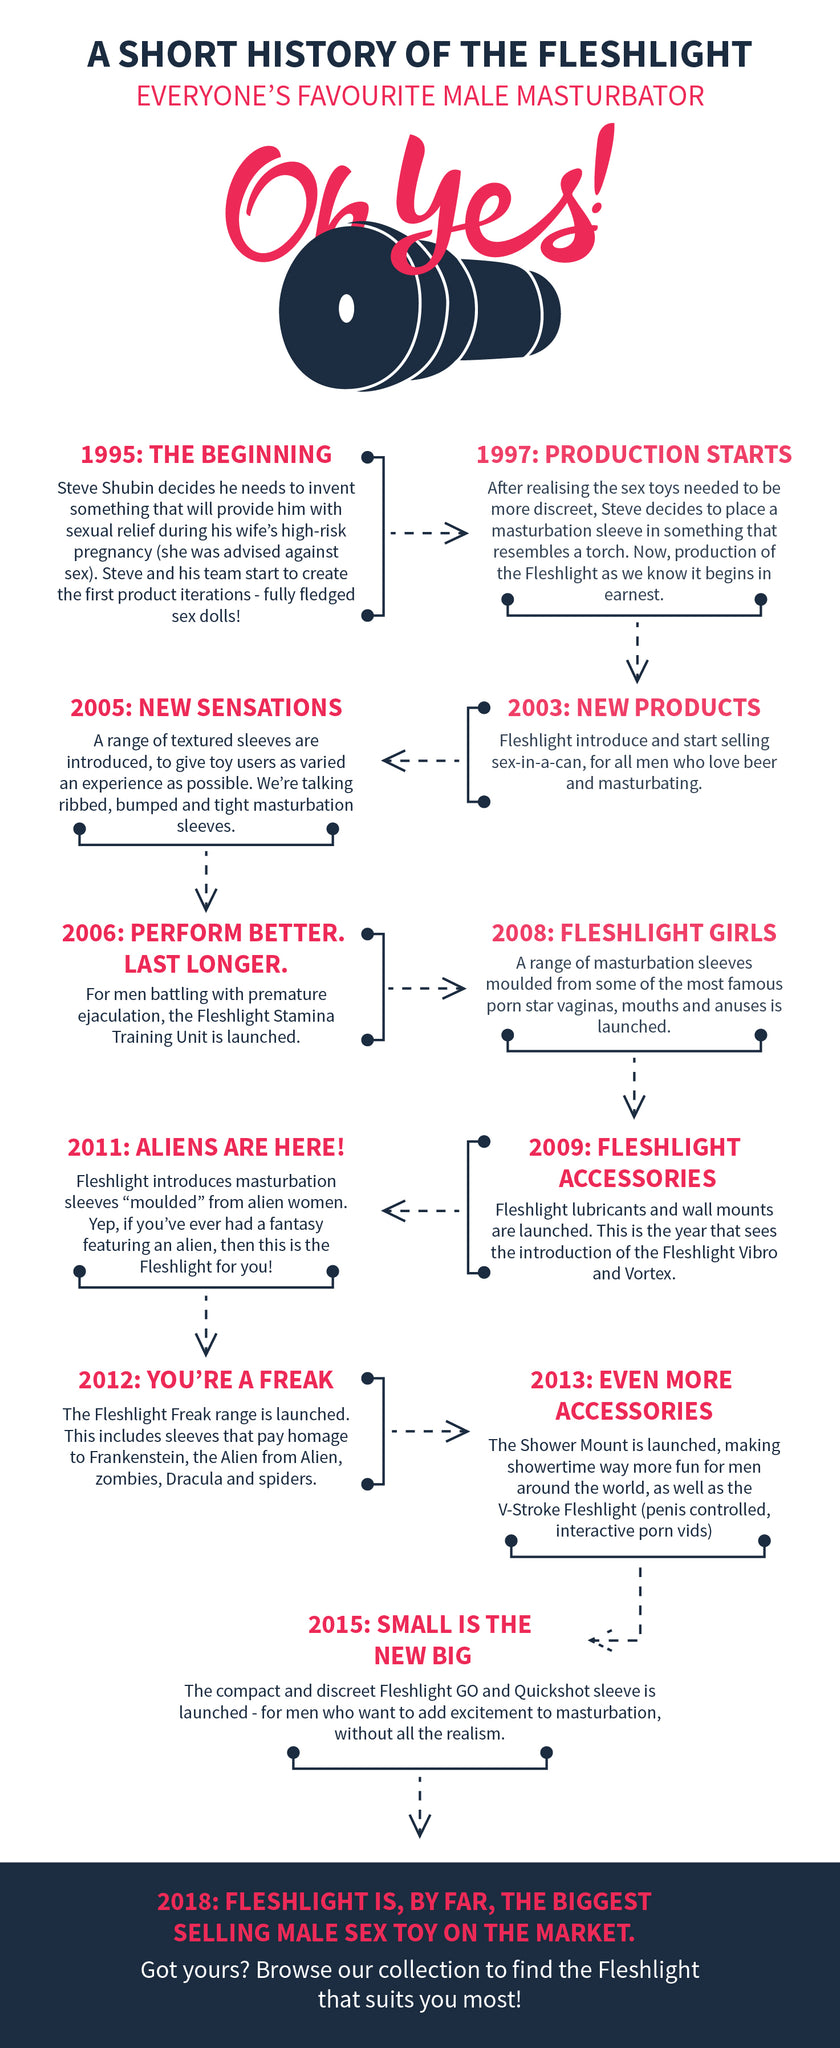 A Brief History of the Fleshlight